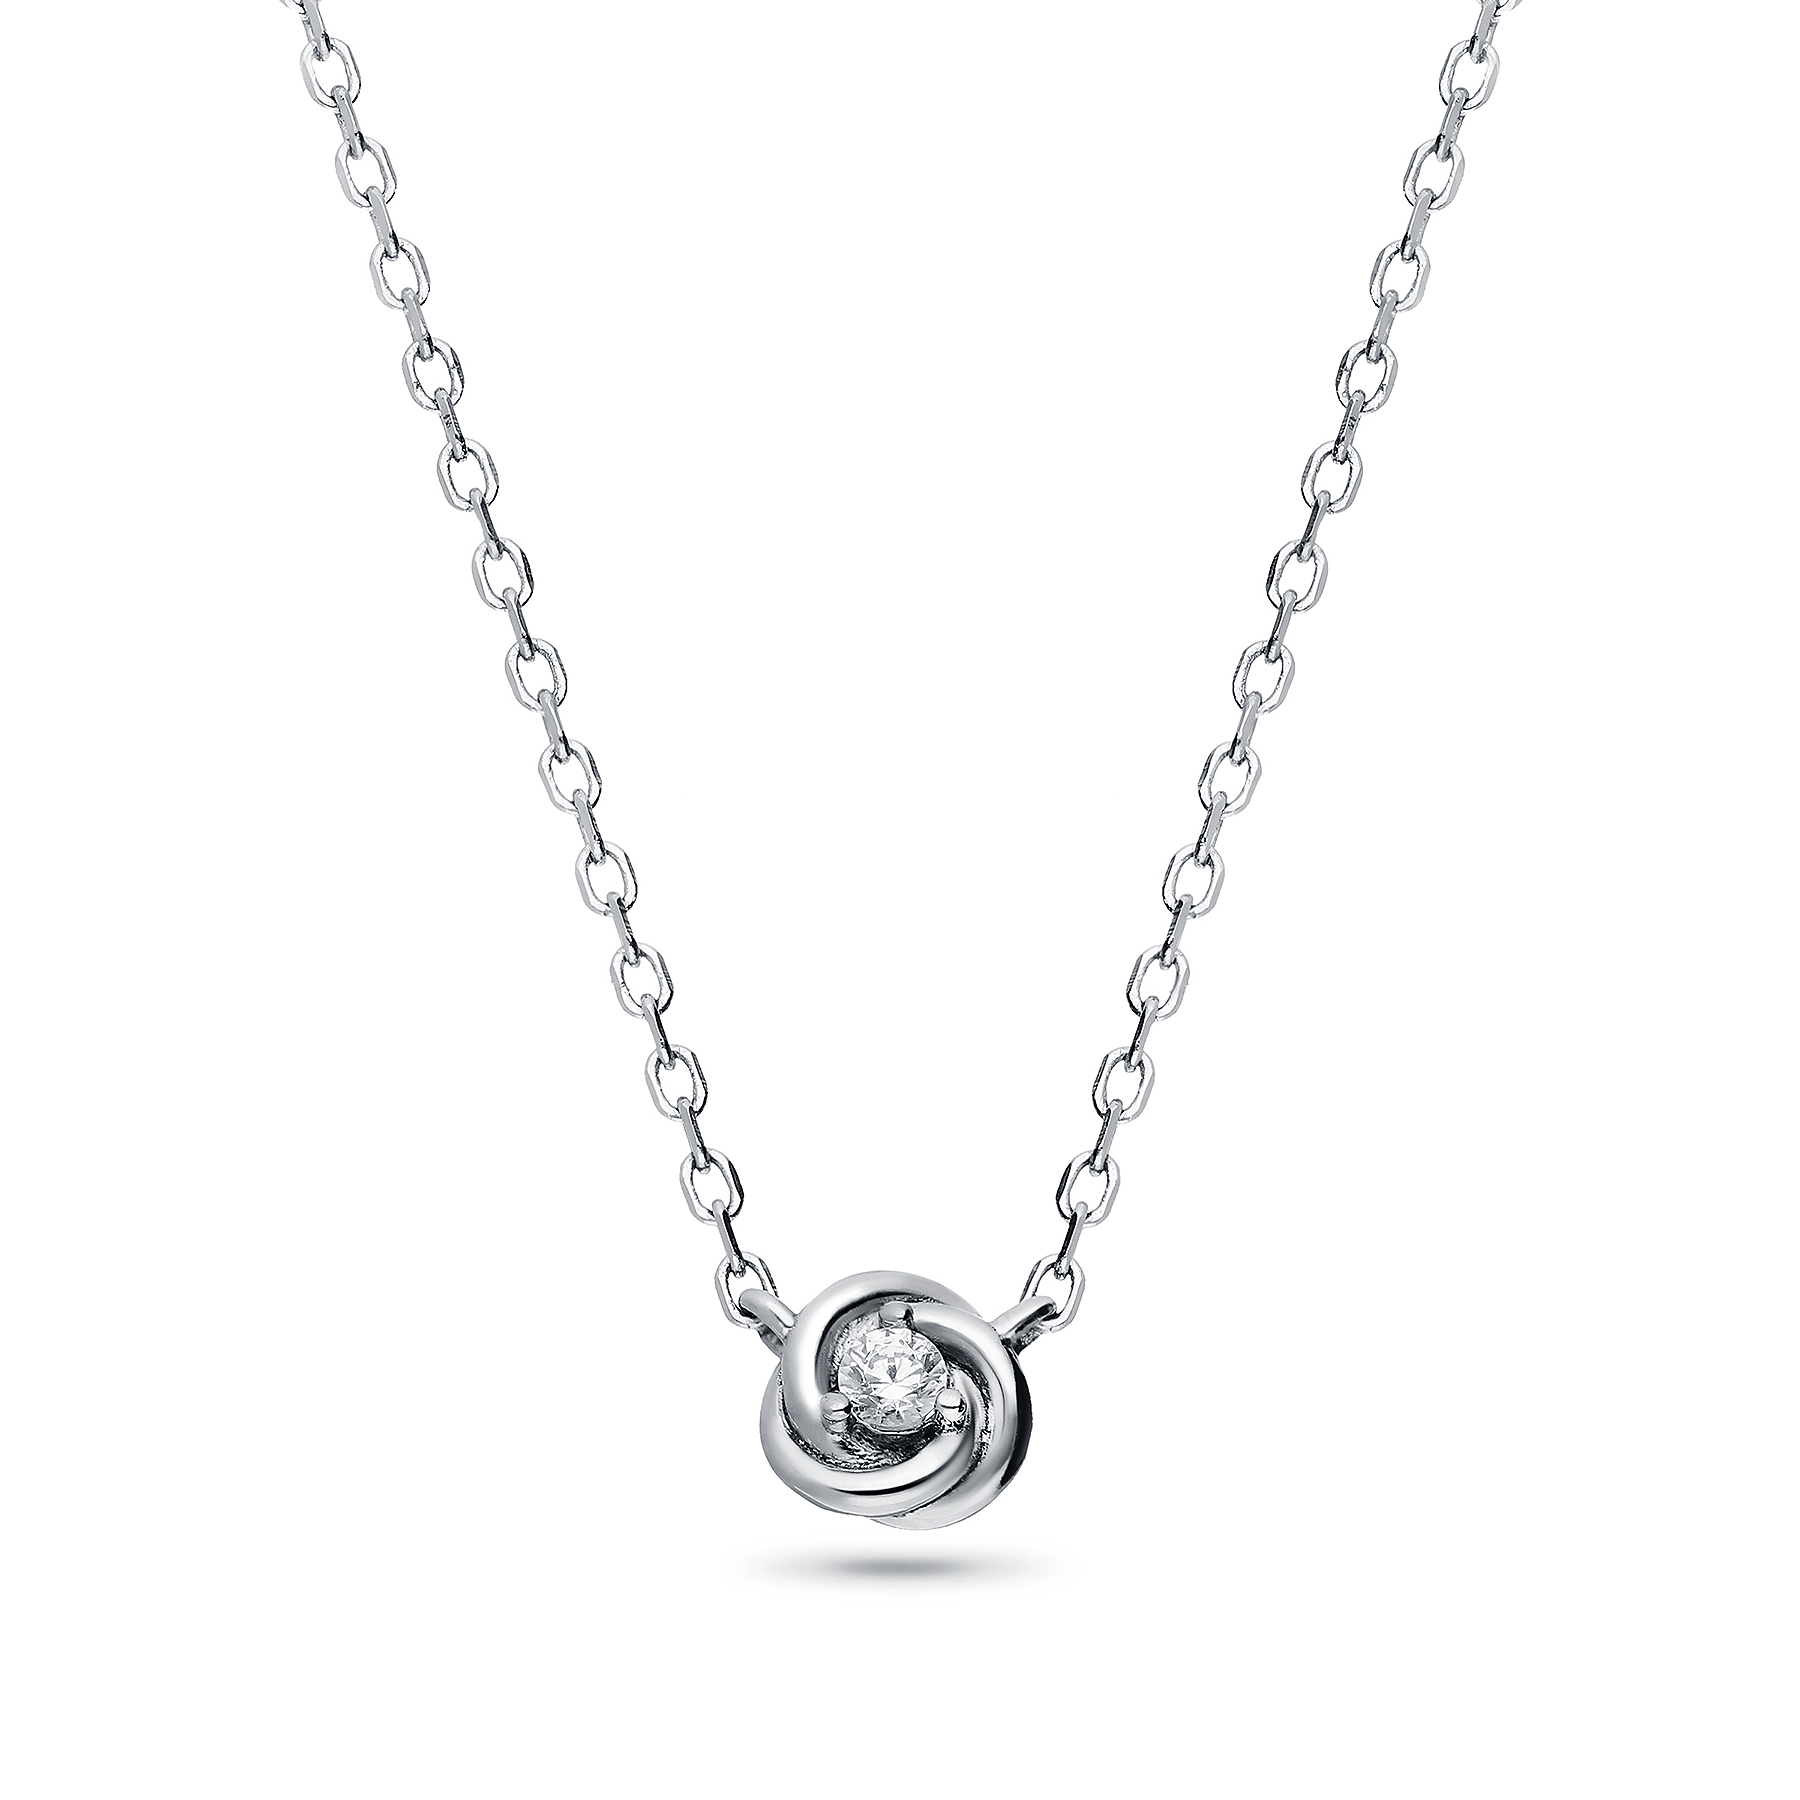 701-21516K - Wholesale 925 Sterling Silver Necklace Decorated With CZ